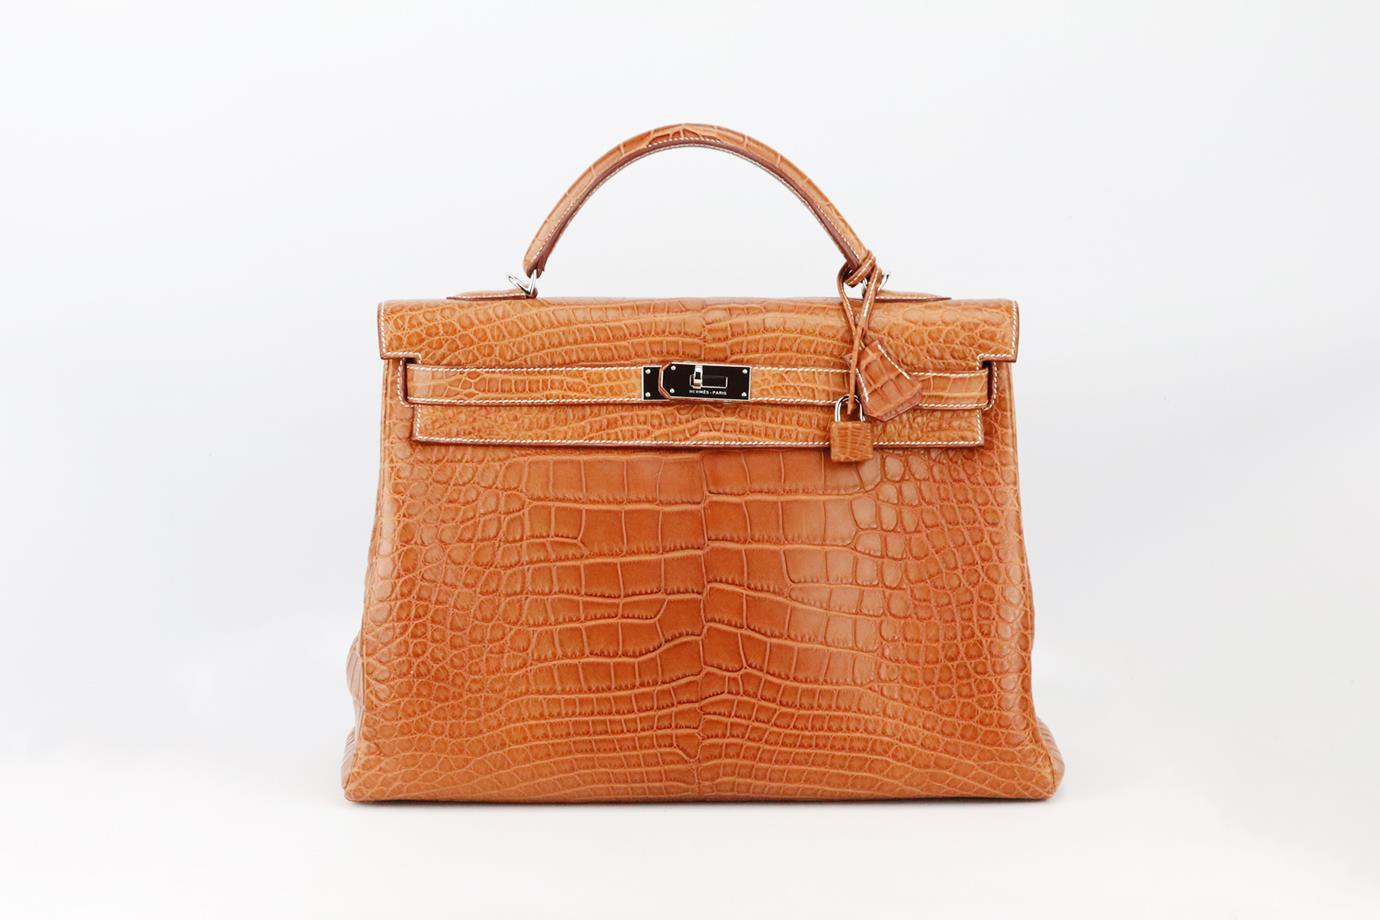 Hermès 2005 Kelly 40cm Matte Alligator Mississippiensis leather bag. Made in France, this beautiful 2010 Hermès ‘Kelly’ handbag has been made from tan ‘Alligator Mississippiensis’ exterior in ‘Fauve’ with matching interior, this piece is decorated